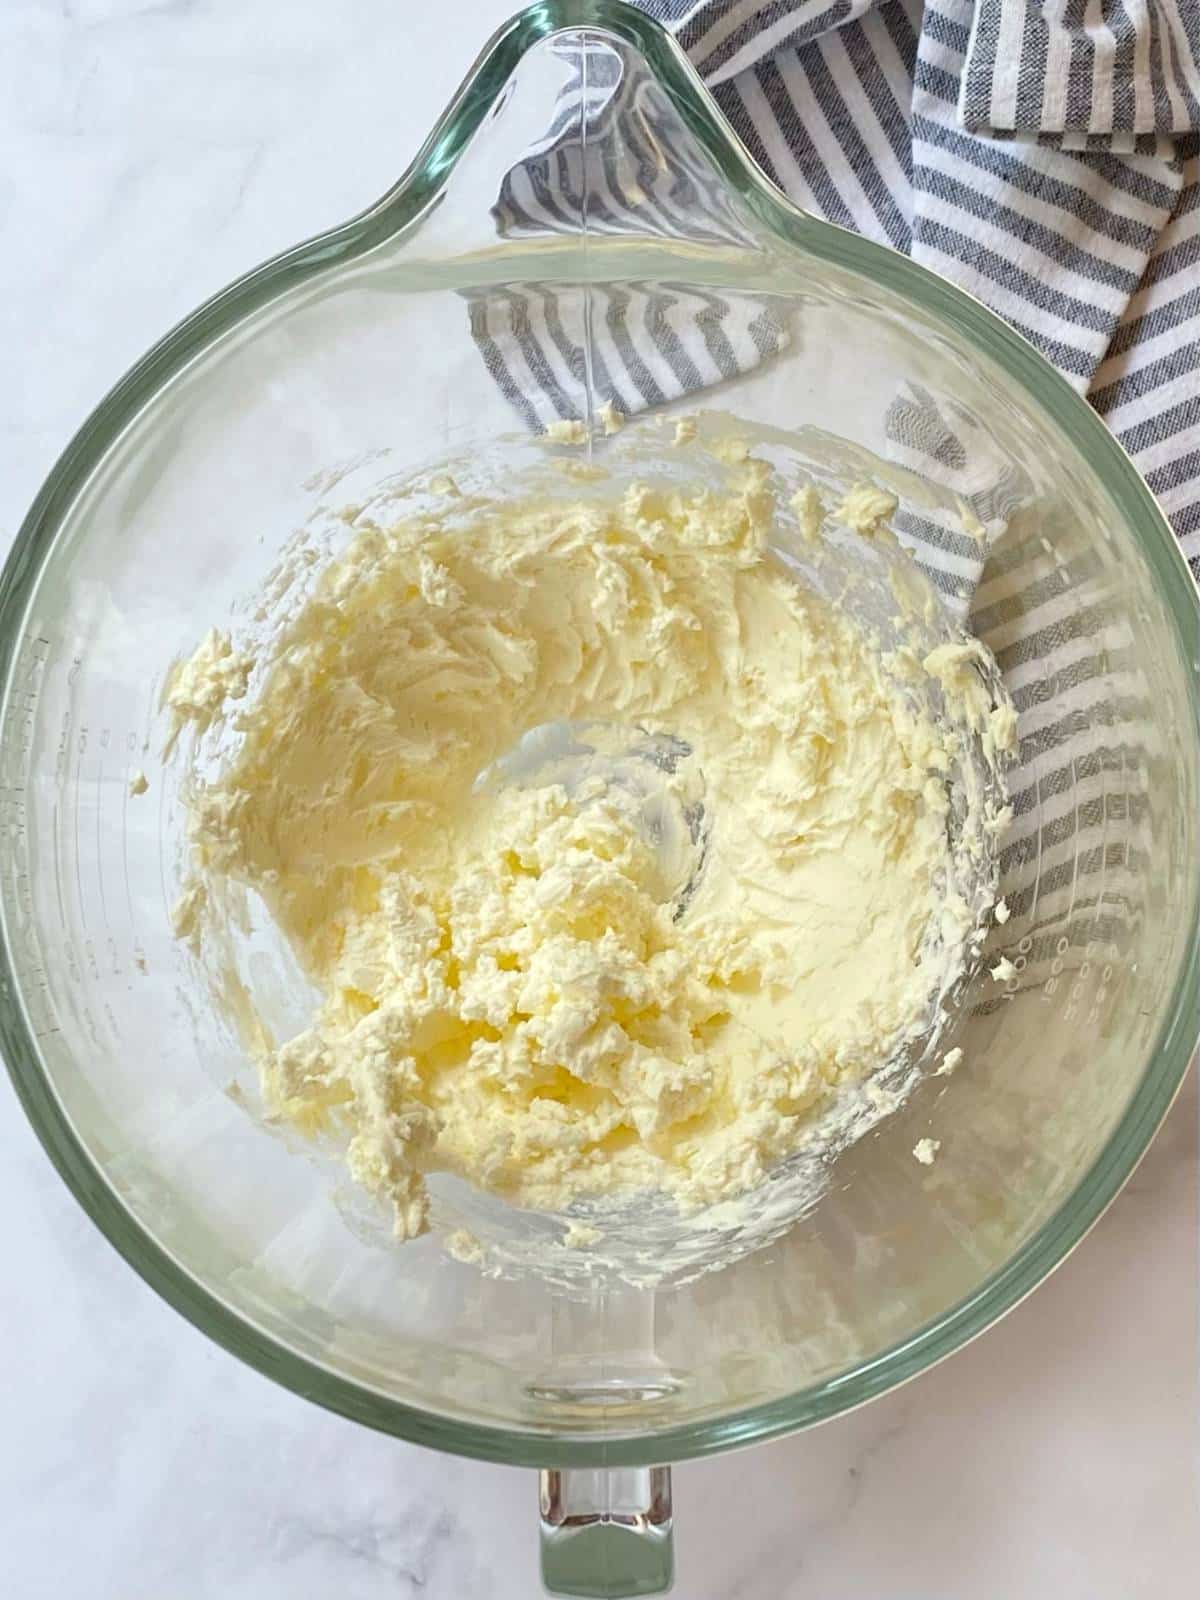 whip cream cheese in a mixing bowl to soften.